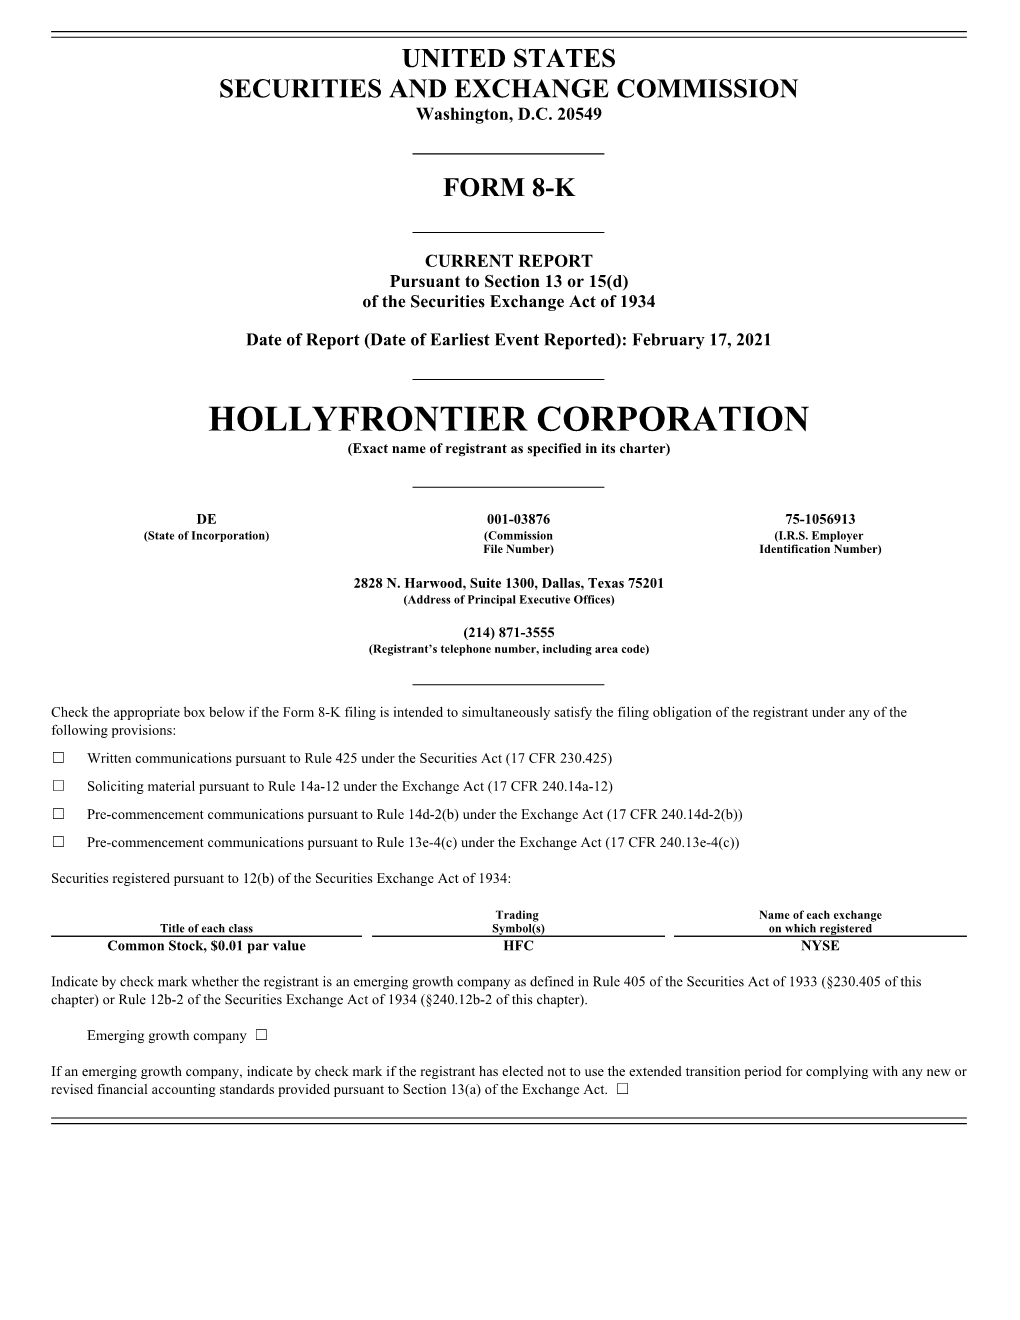 HOLLYFRONTIER CORPORATION (Exact Name of Registrant As Specified in Its Charter)